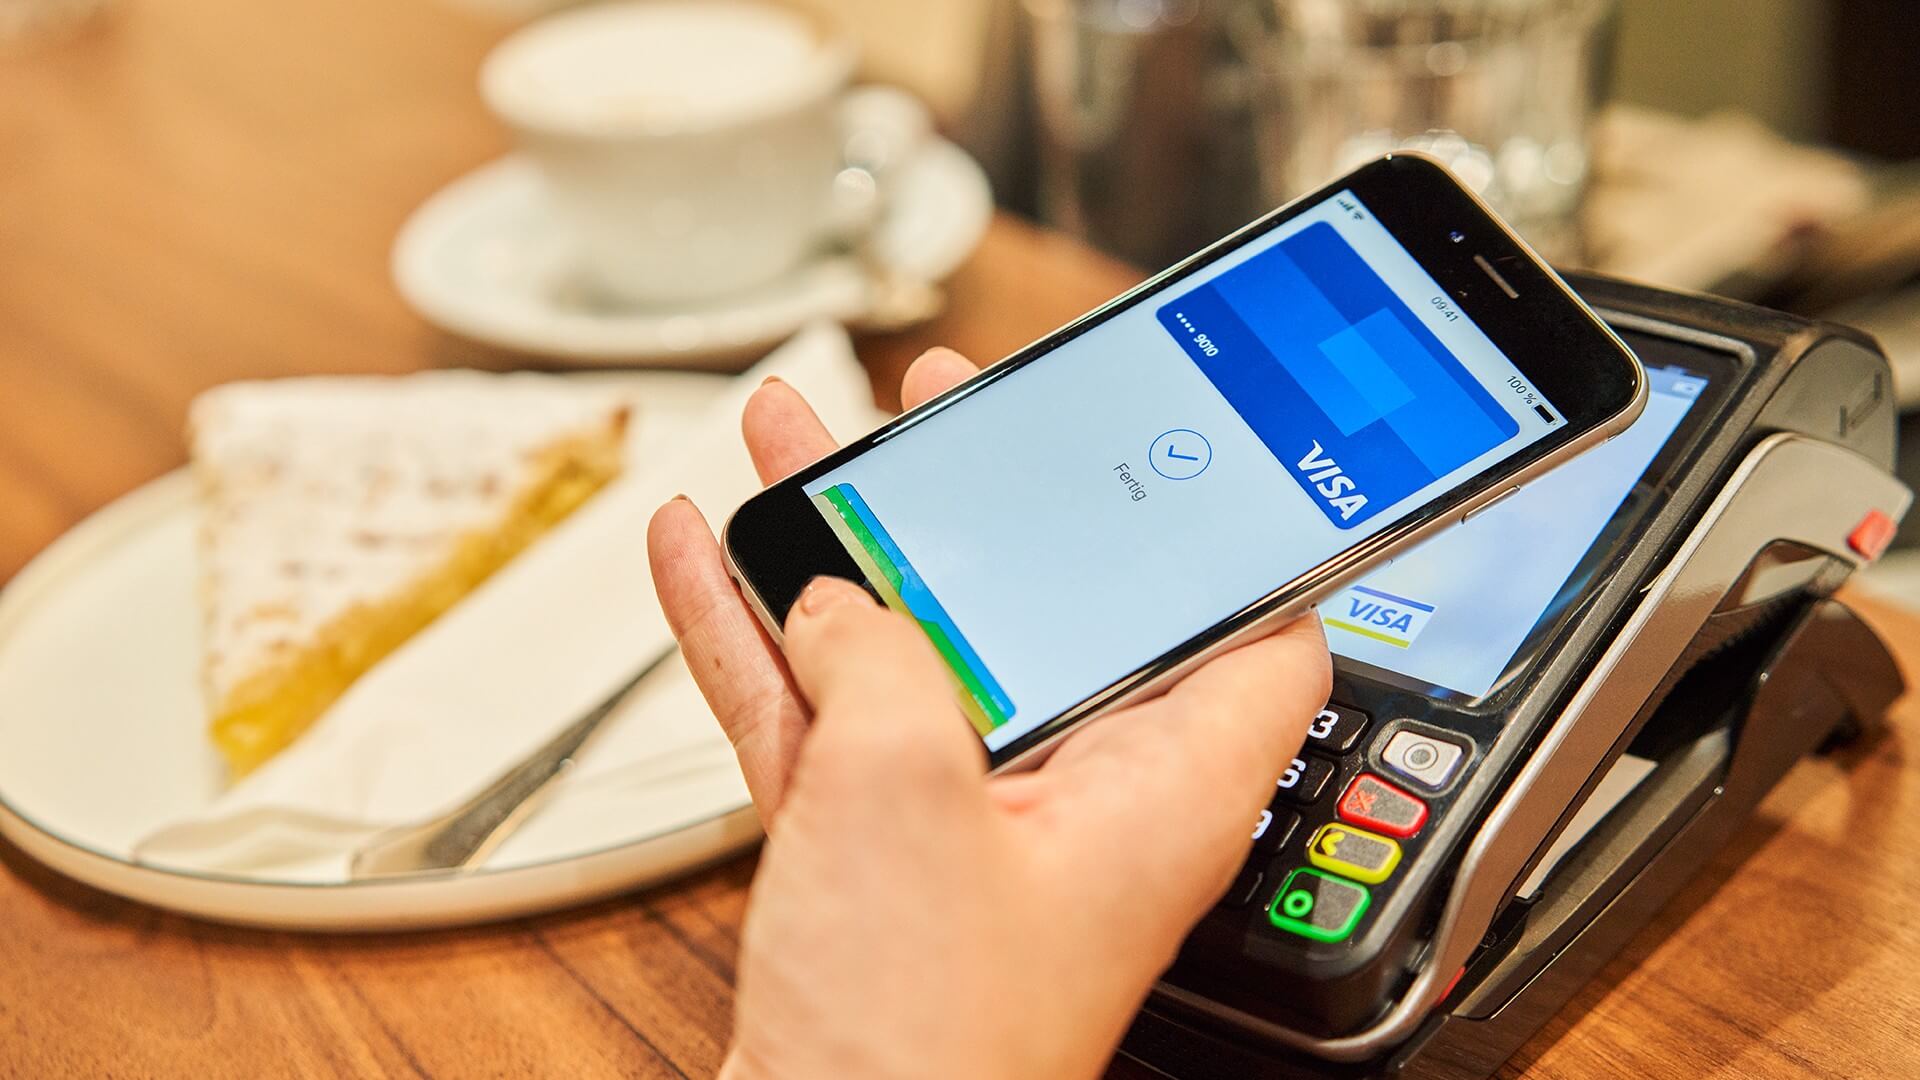 Add mobile payments into your eCommerce payment options